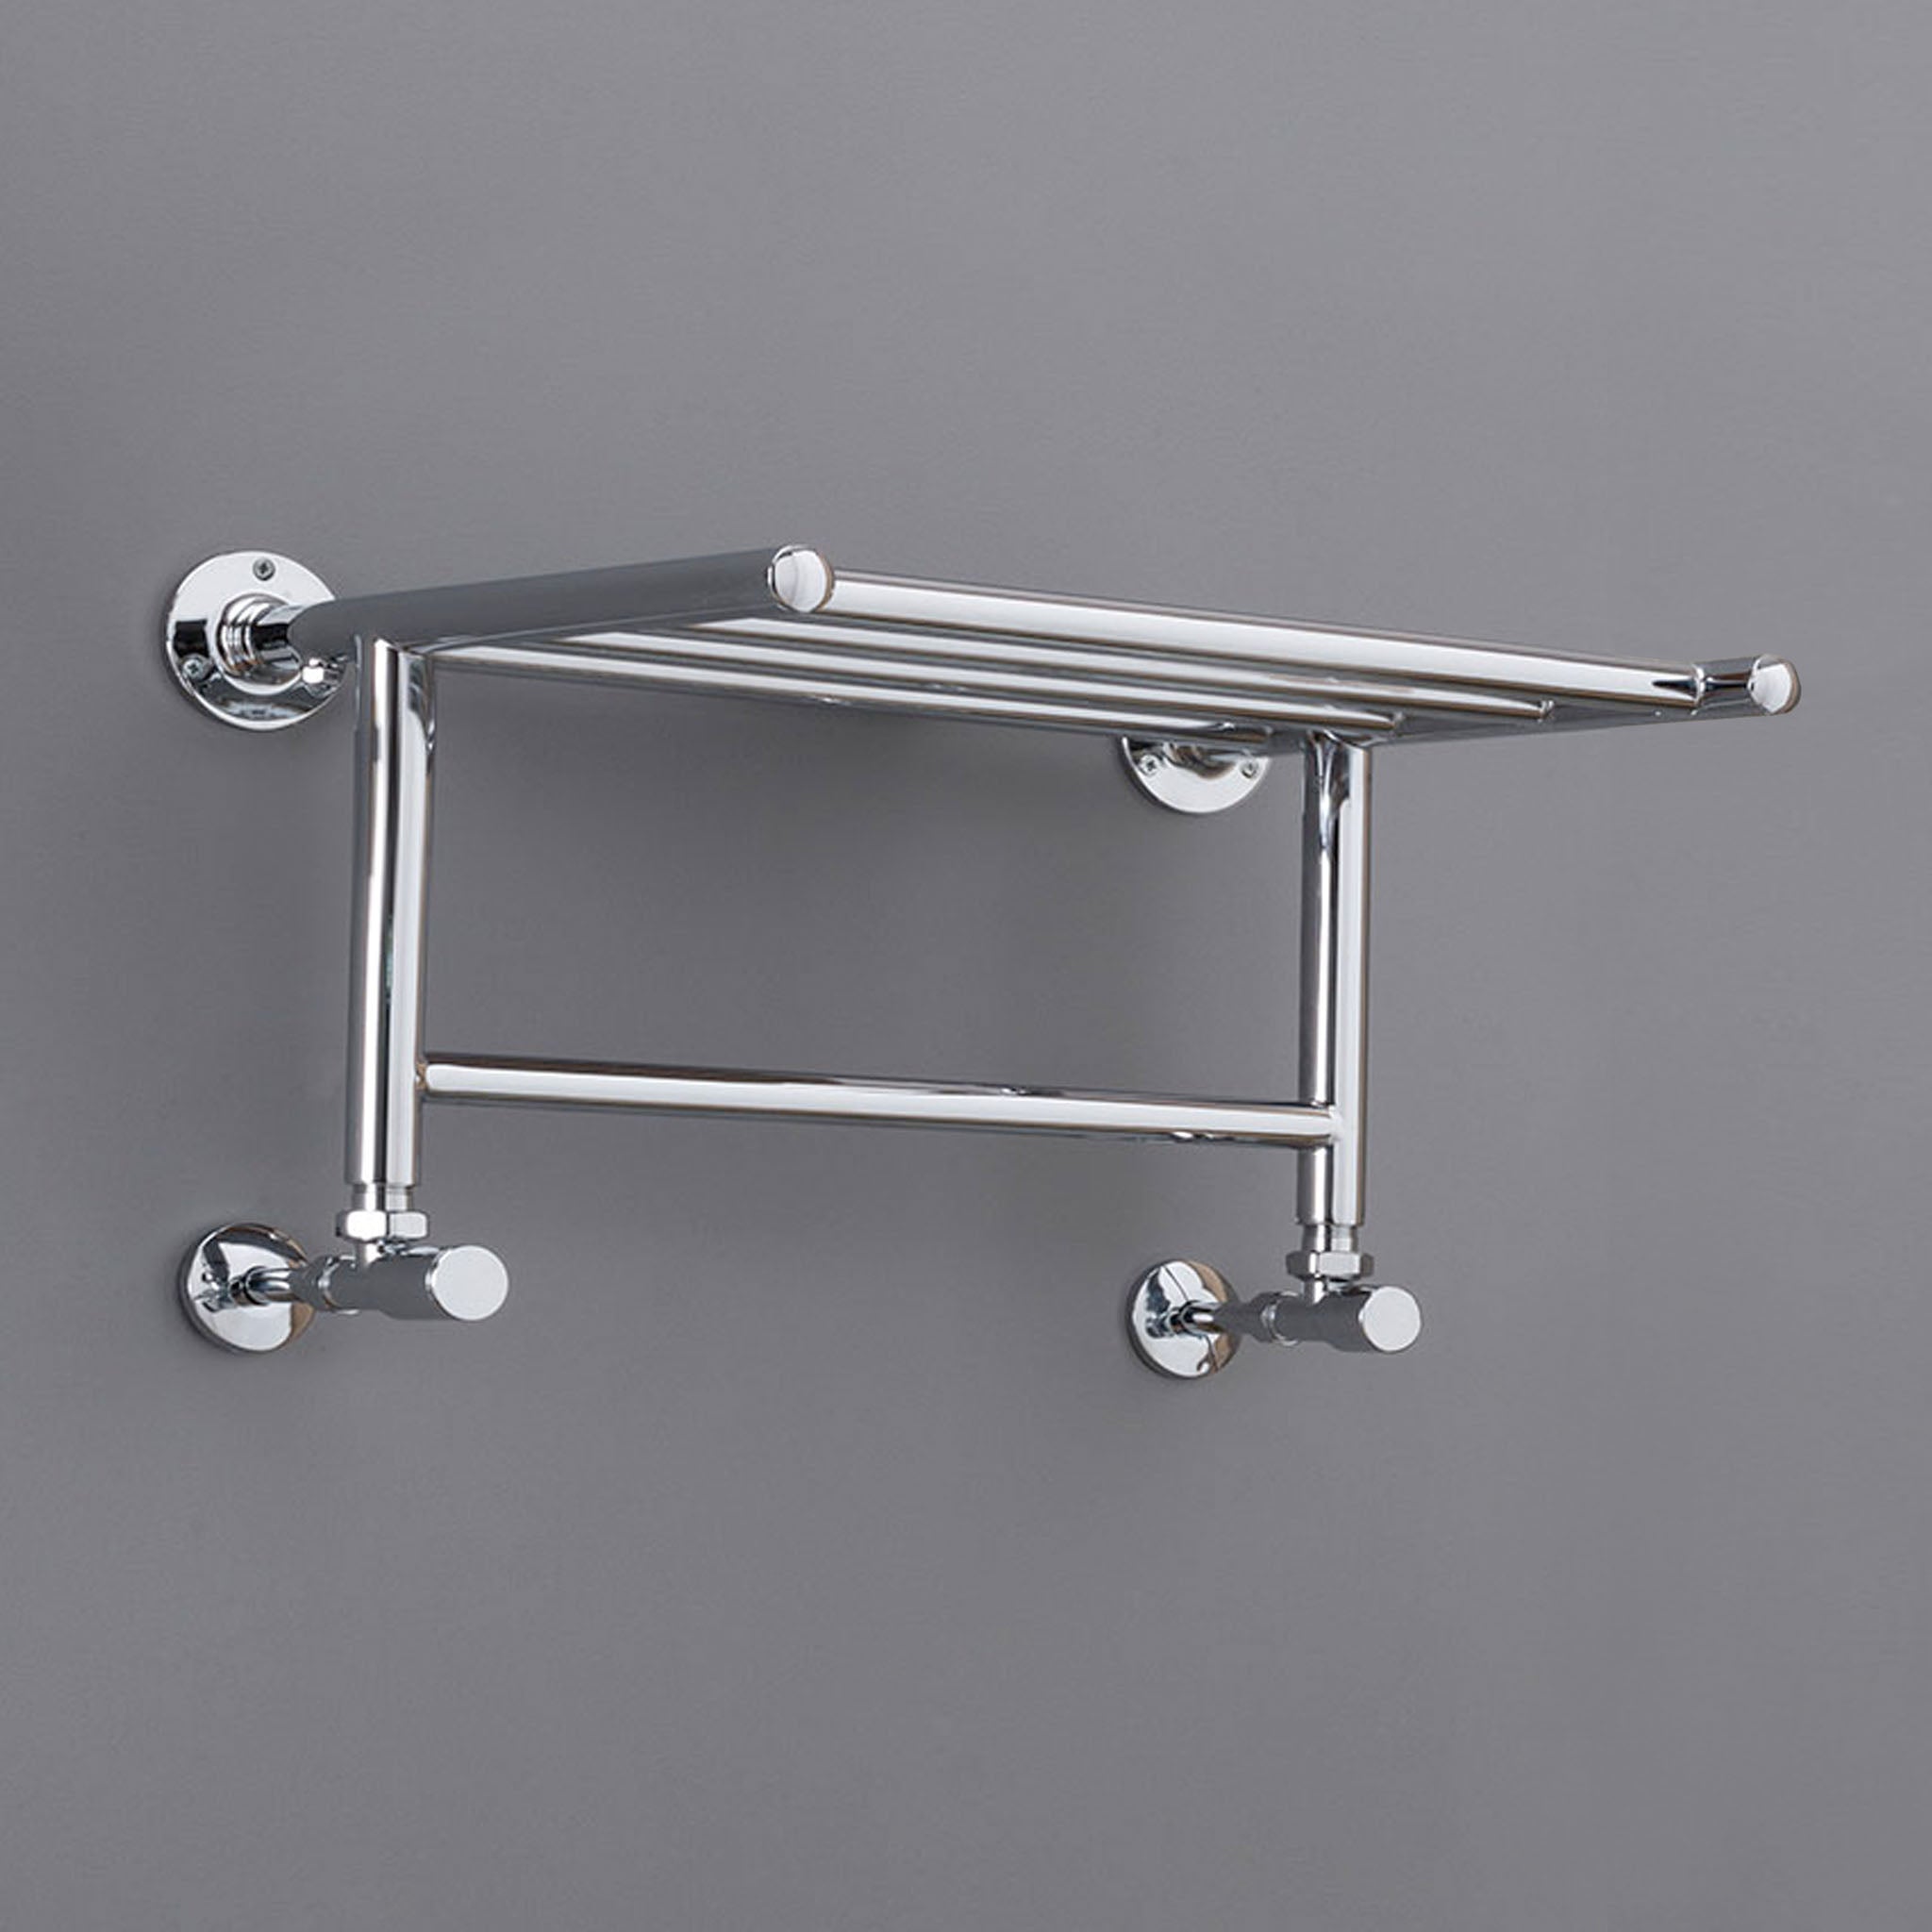 Vogue Solo Wall Mounted Heated Towel Rack